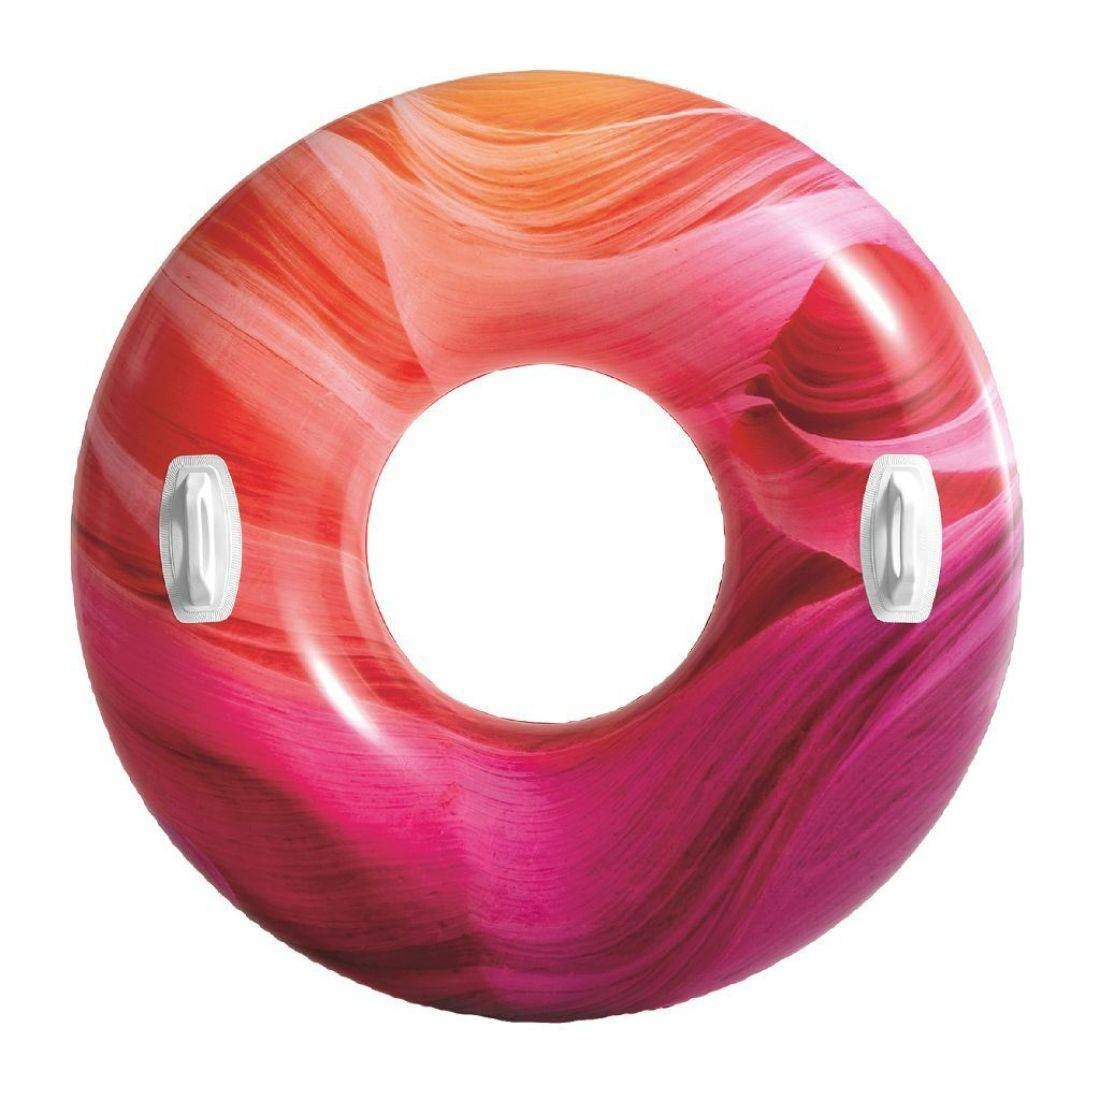 Intex Inflatable wheel with handles Waves of Nature Tubes